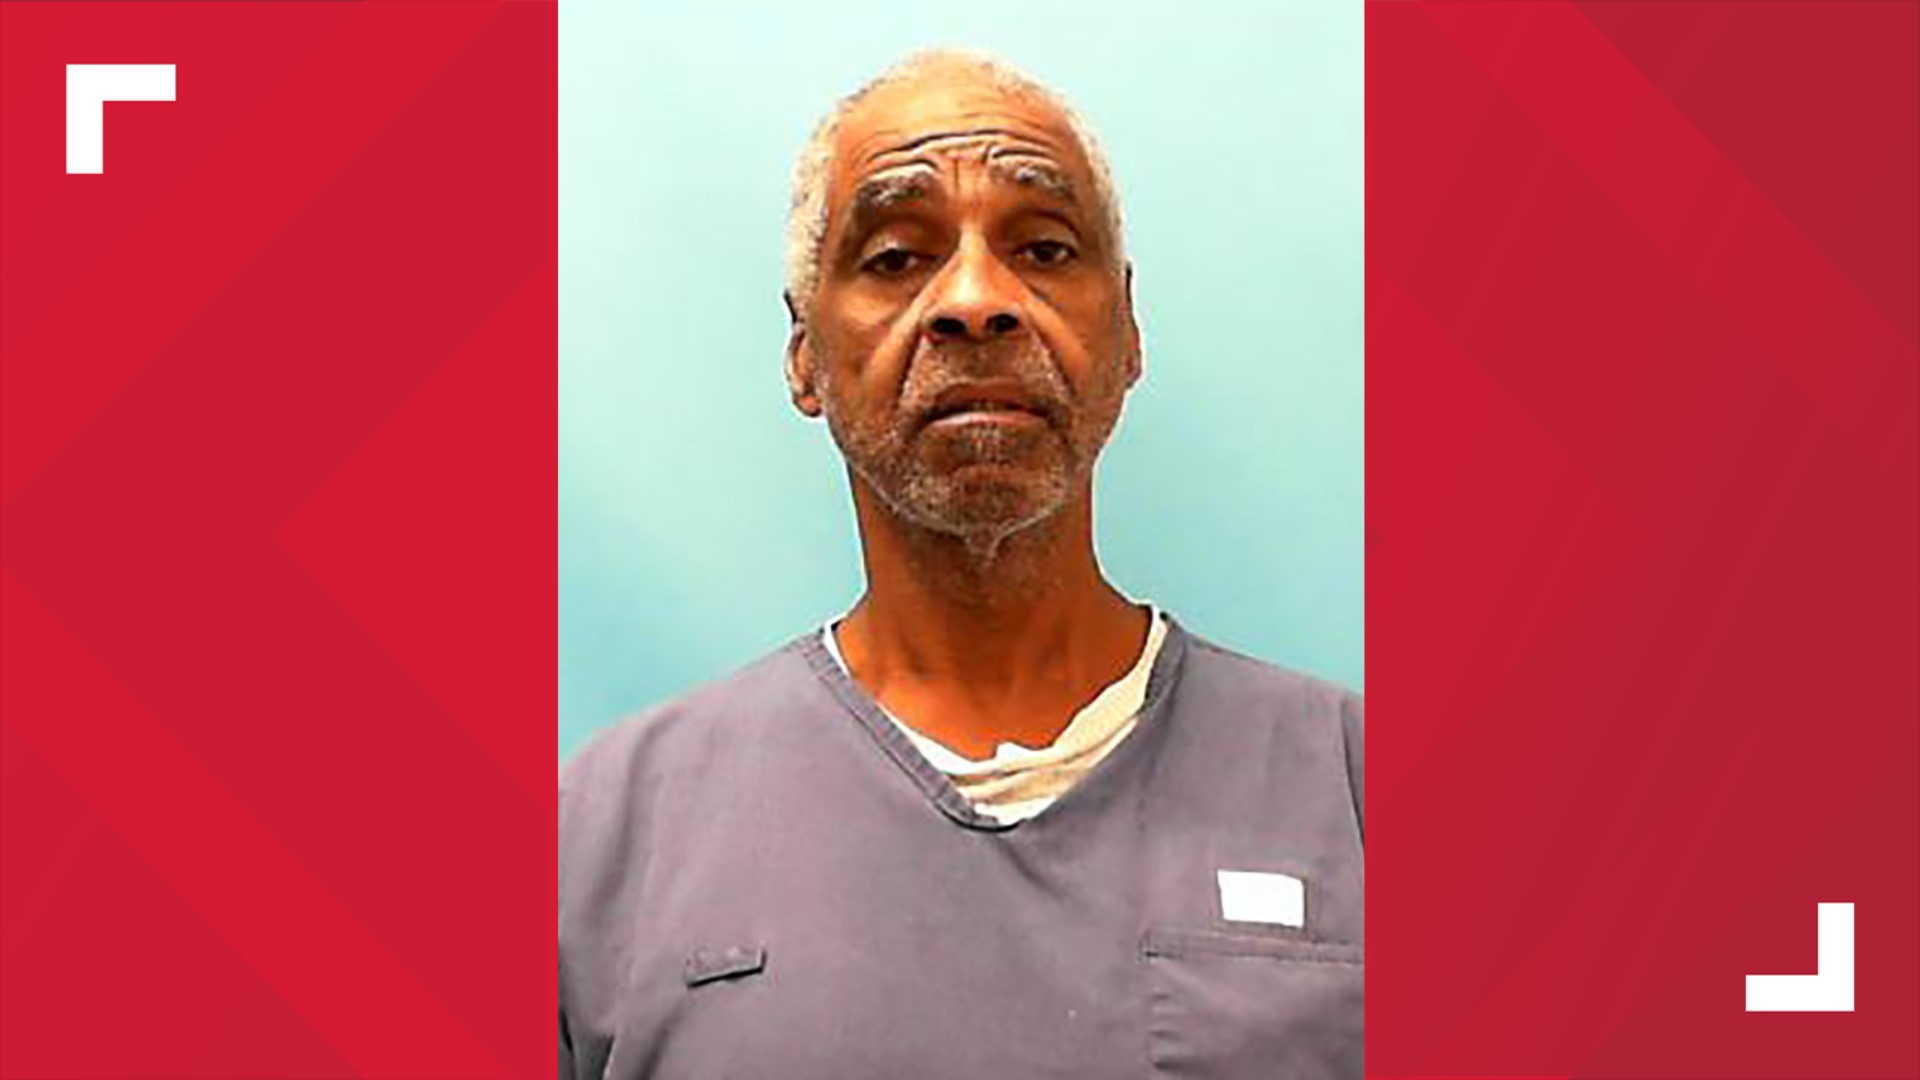 Ricky Dawson, 62, was in prison in Florida for a 2001 homicide until he was extradited to Colorado this week.